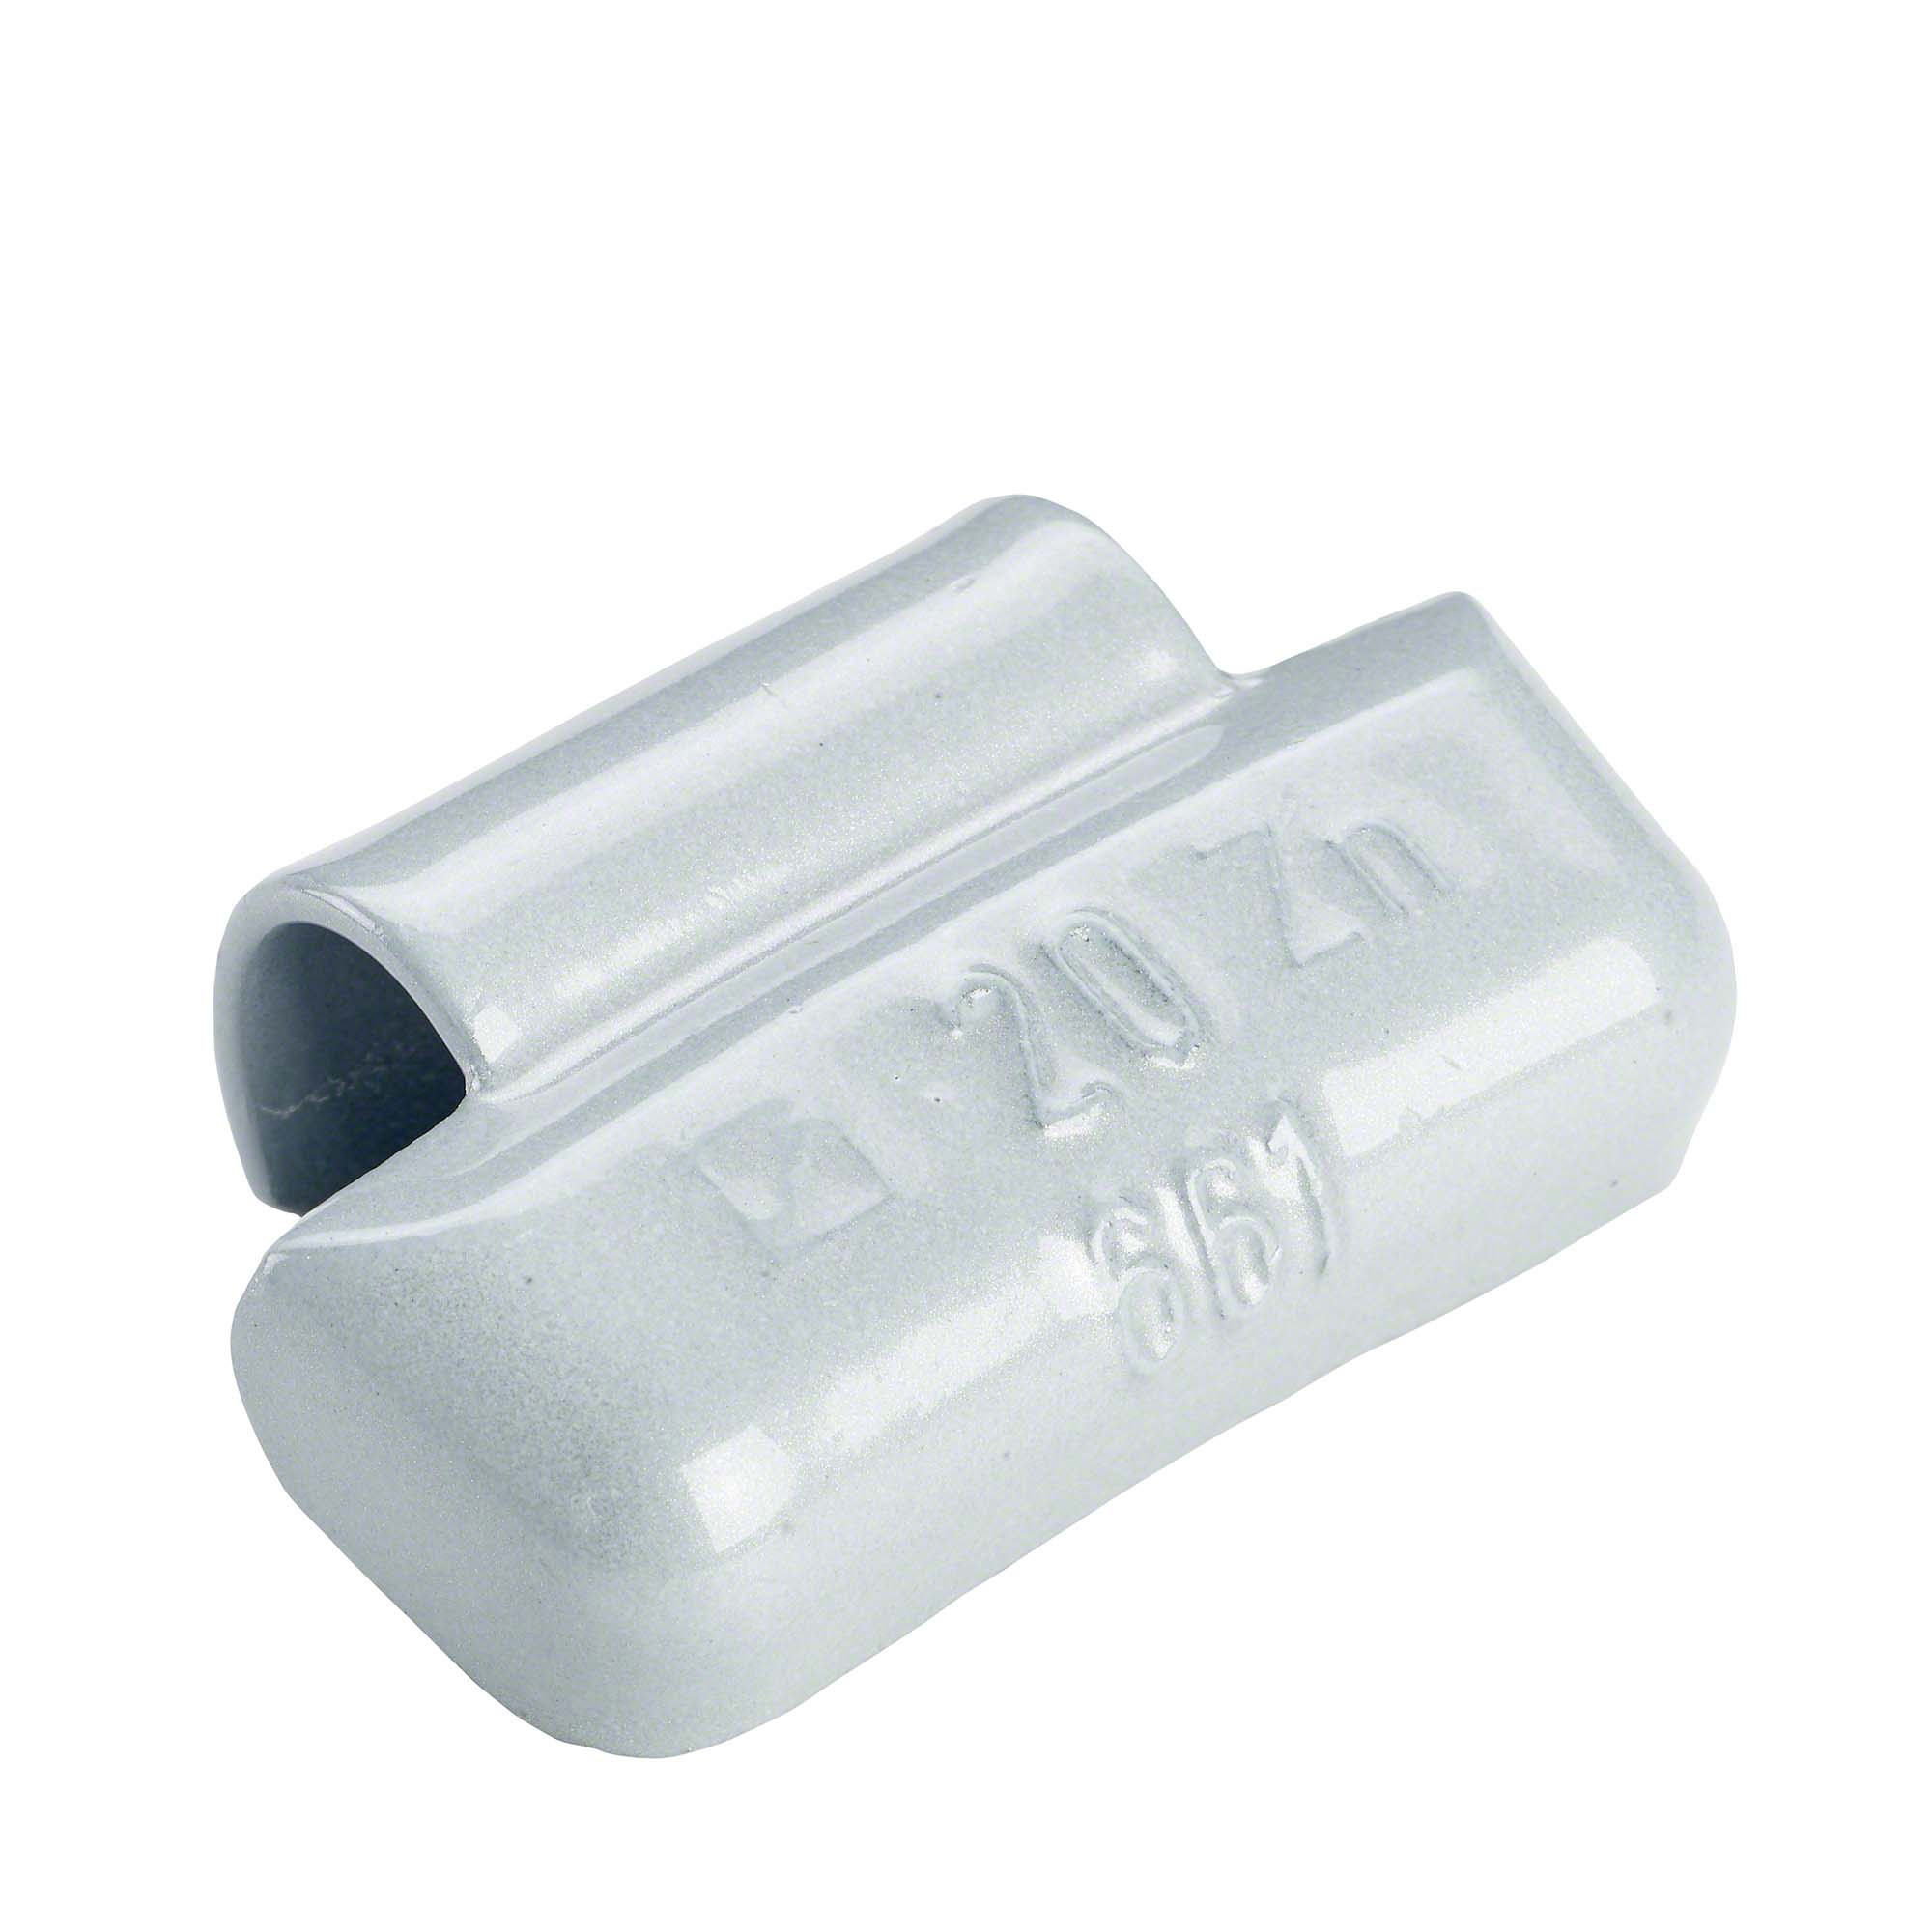 knock-on weight - Typ 661, 20 g, zinc, silver